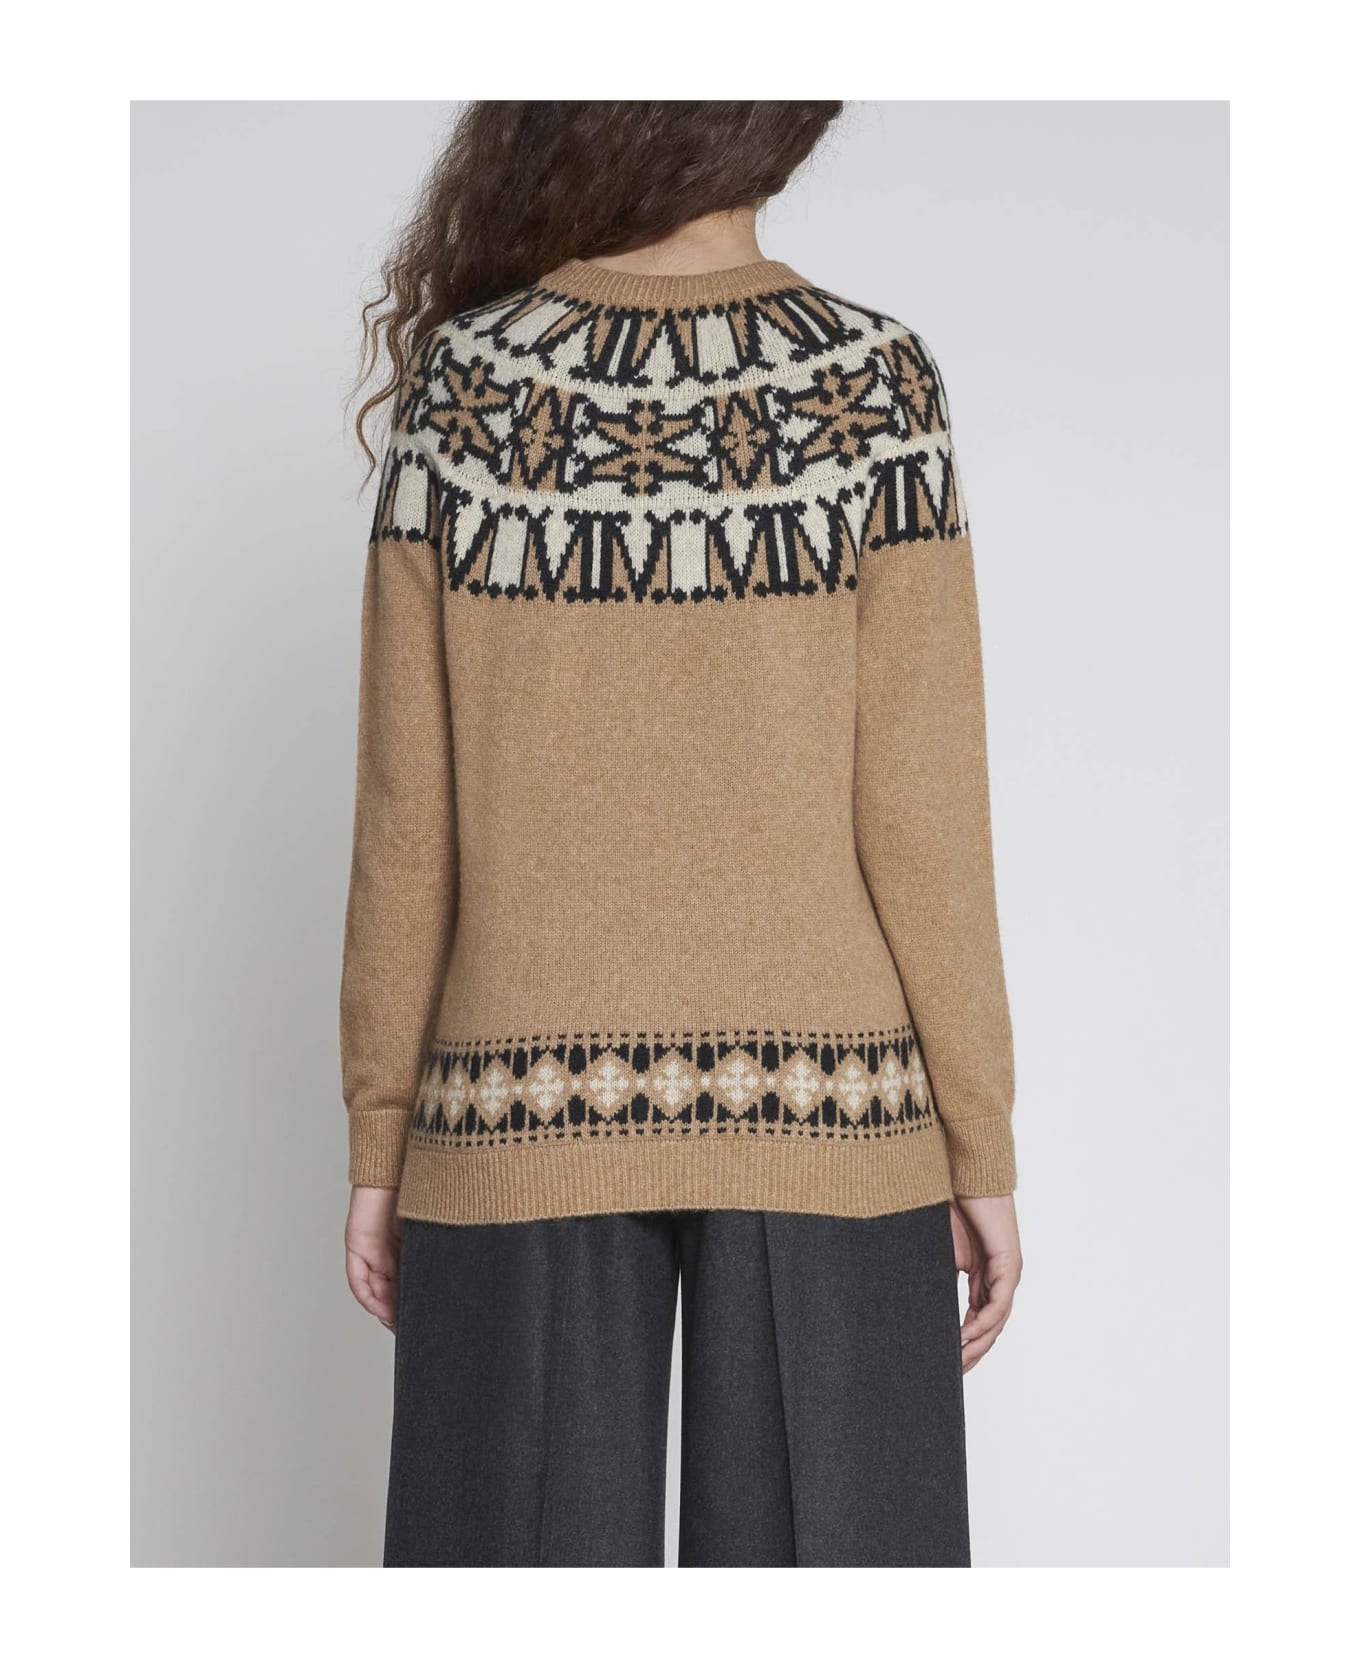 Max Mara Trudy Wool And Camel Blend Sweater - Cammello